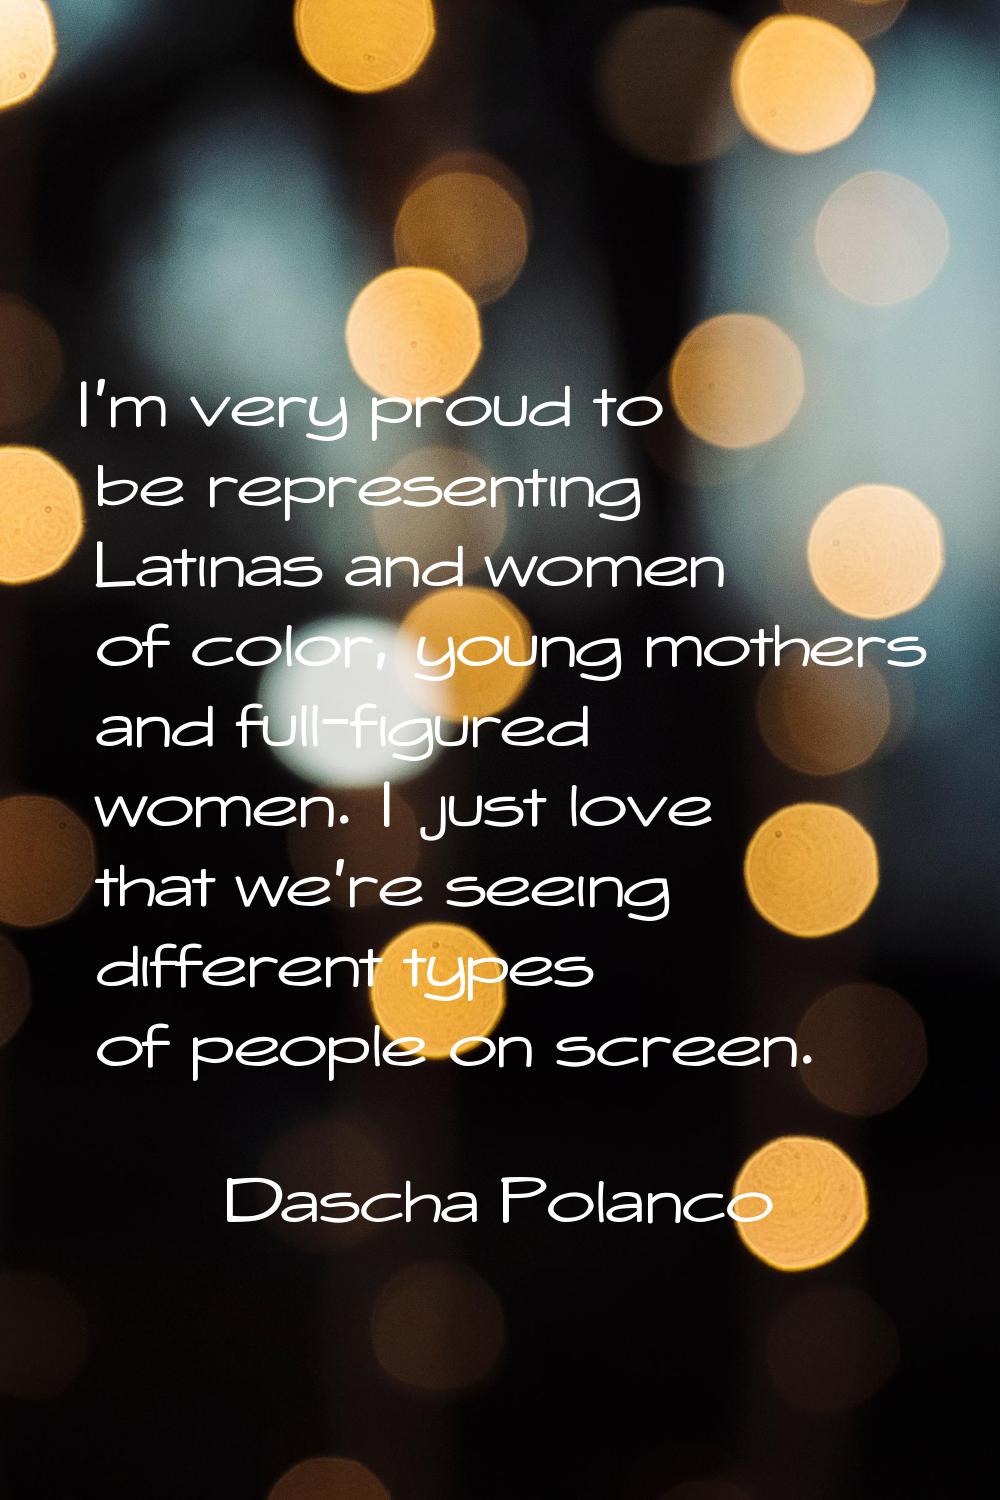 I'm very proud to be representing Latinas and women of color, young mothers and full-figured women.